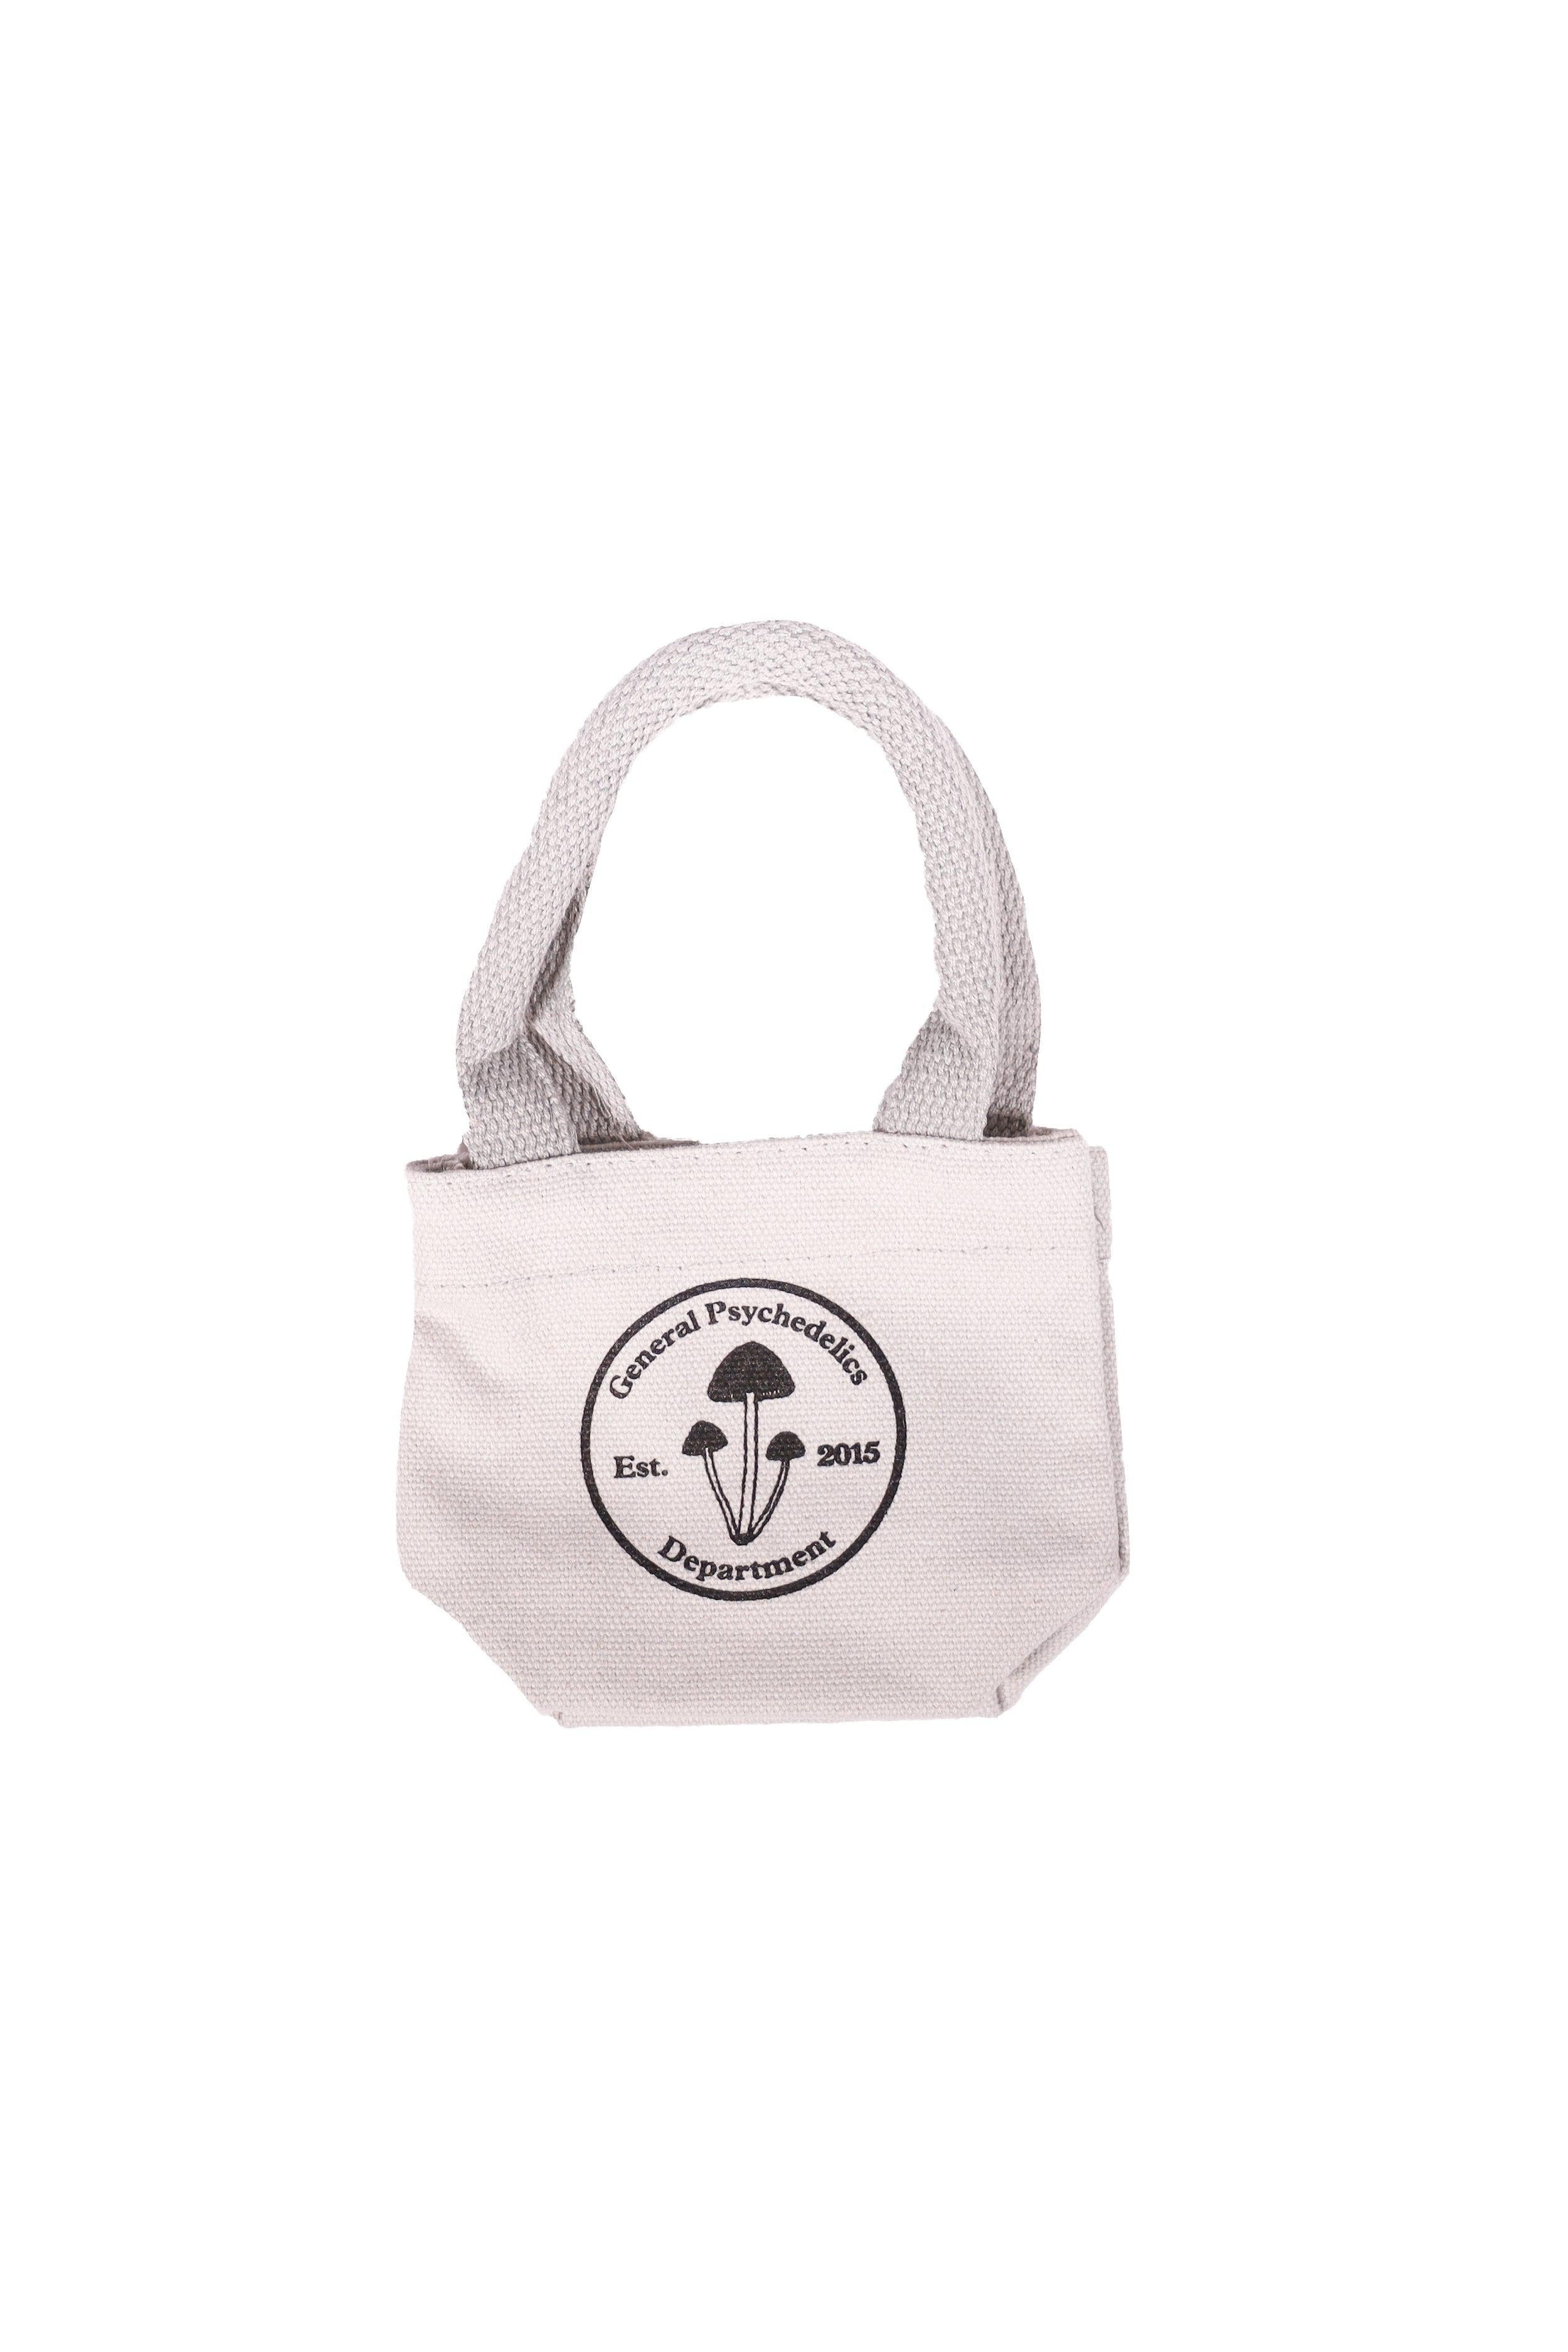 General Psychedelic Department Mini Tote - Grey-Mister Green-Mister Green